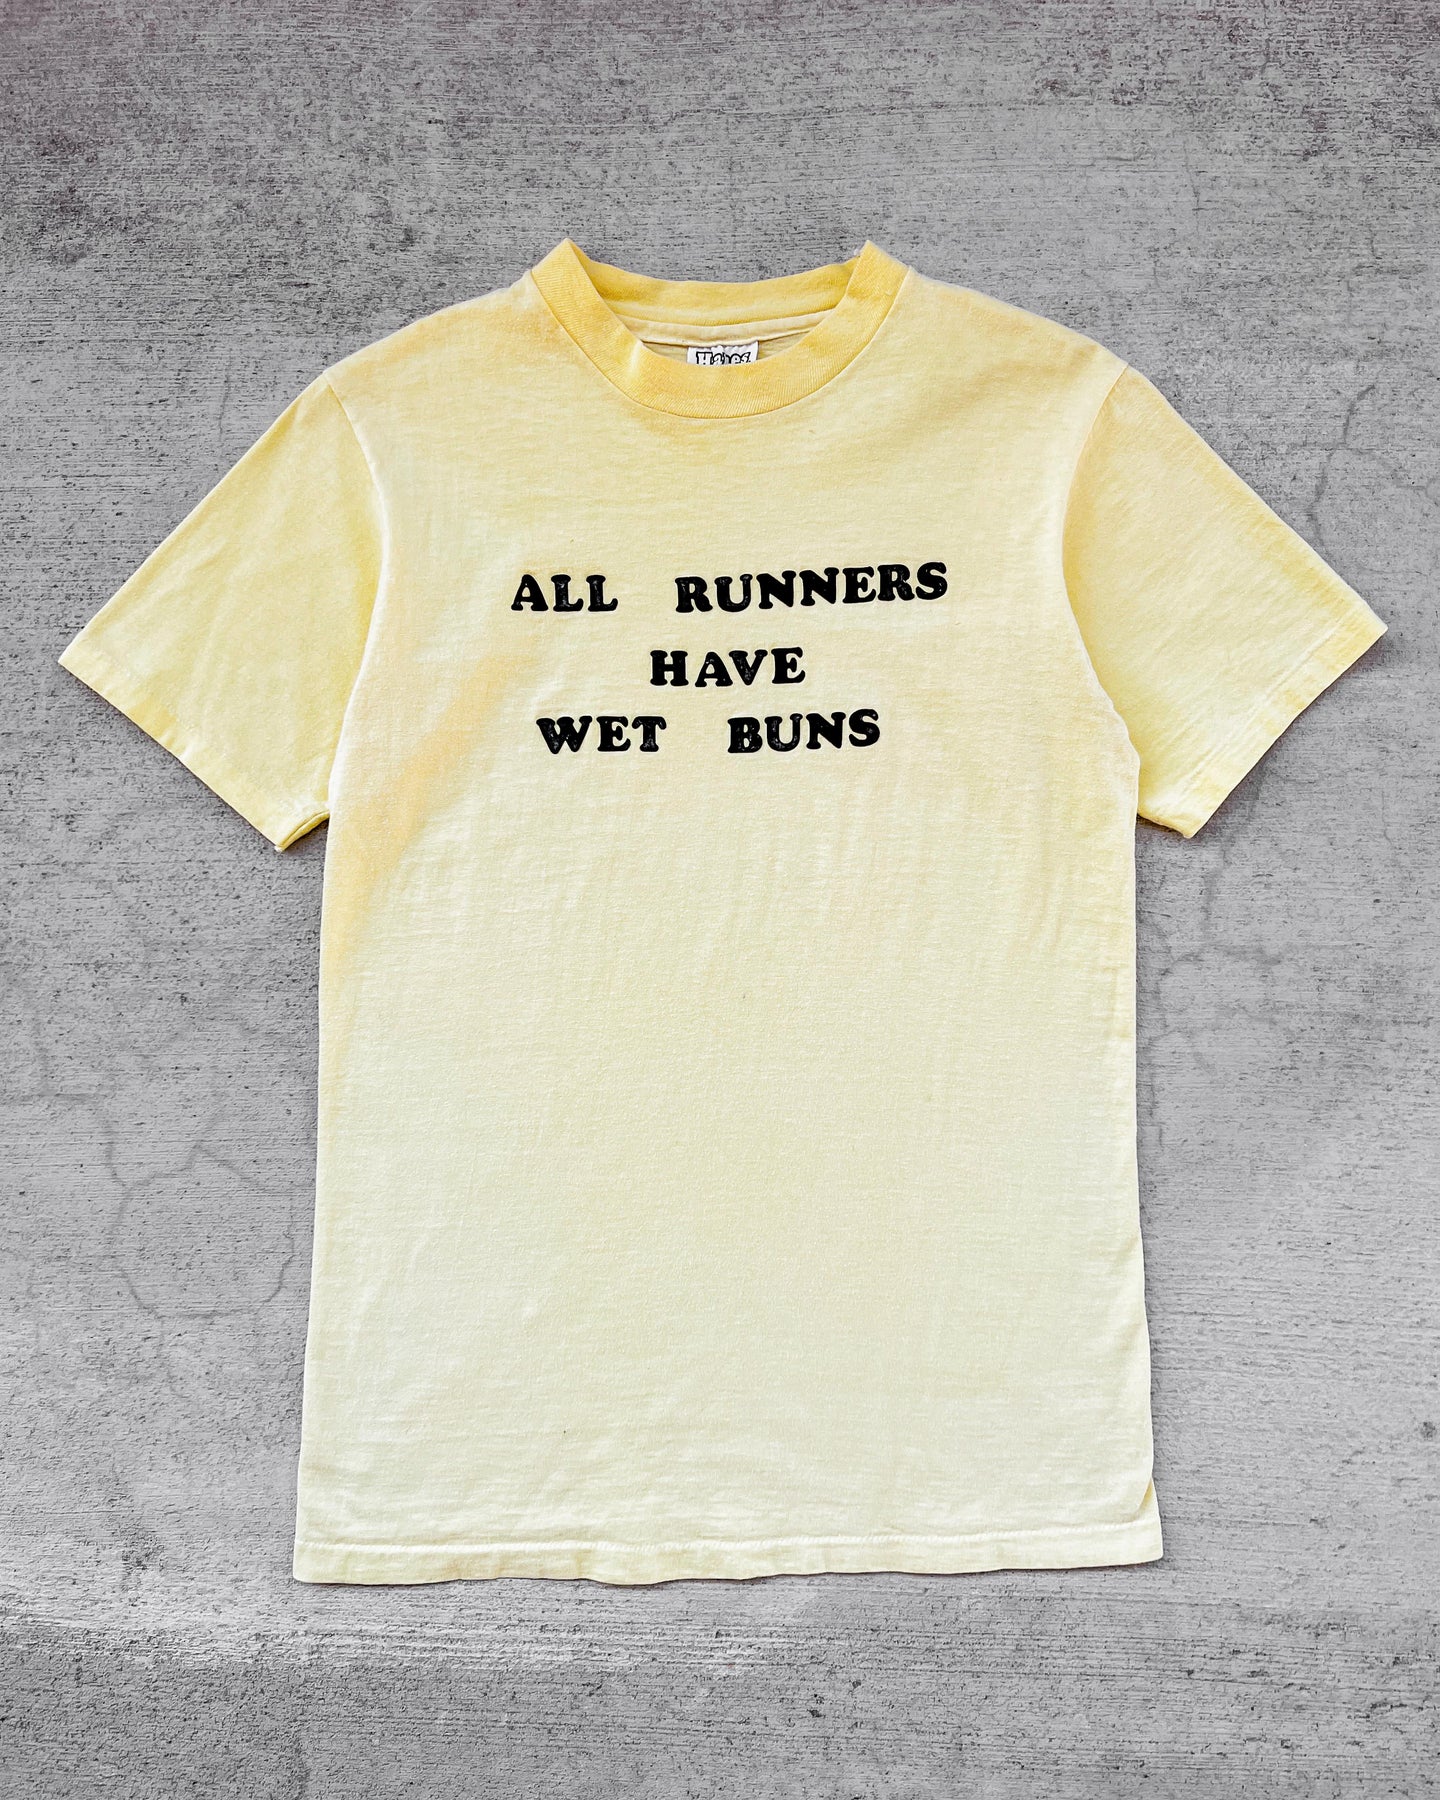 1980s All Runners Have Wet Buns Single Stitch Tee - Size Medium